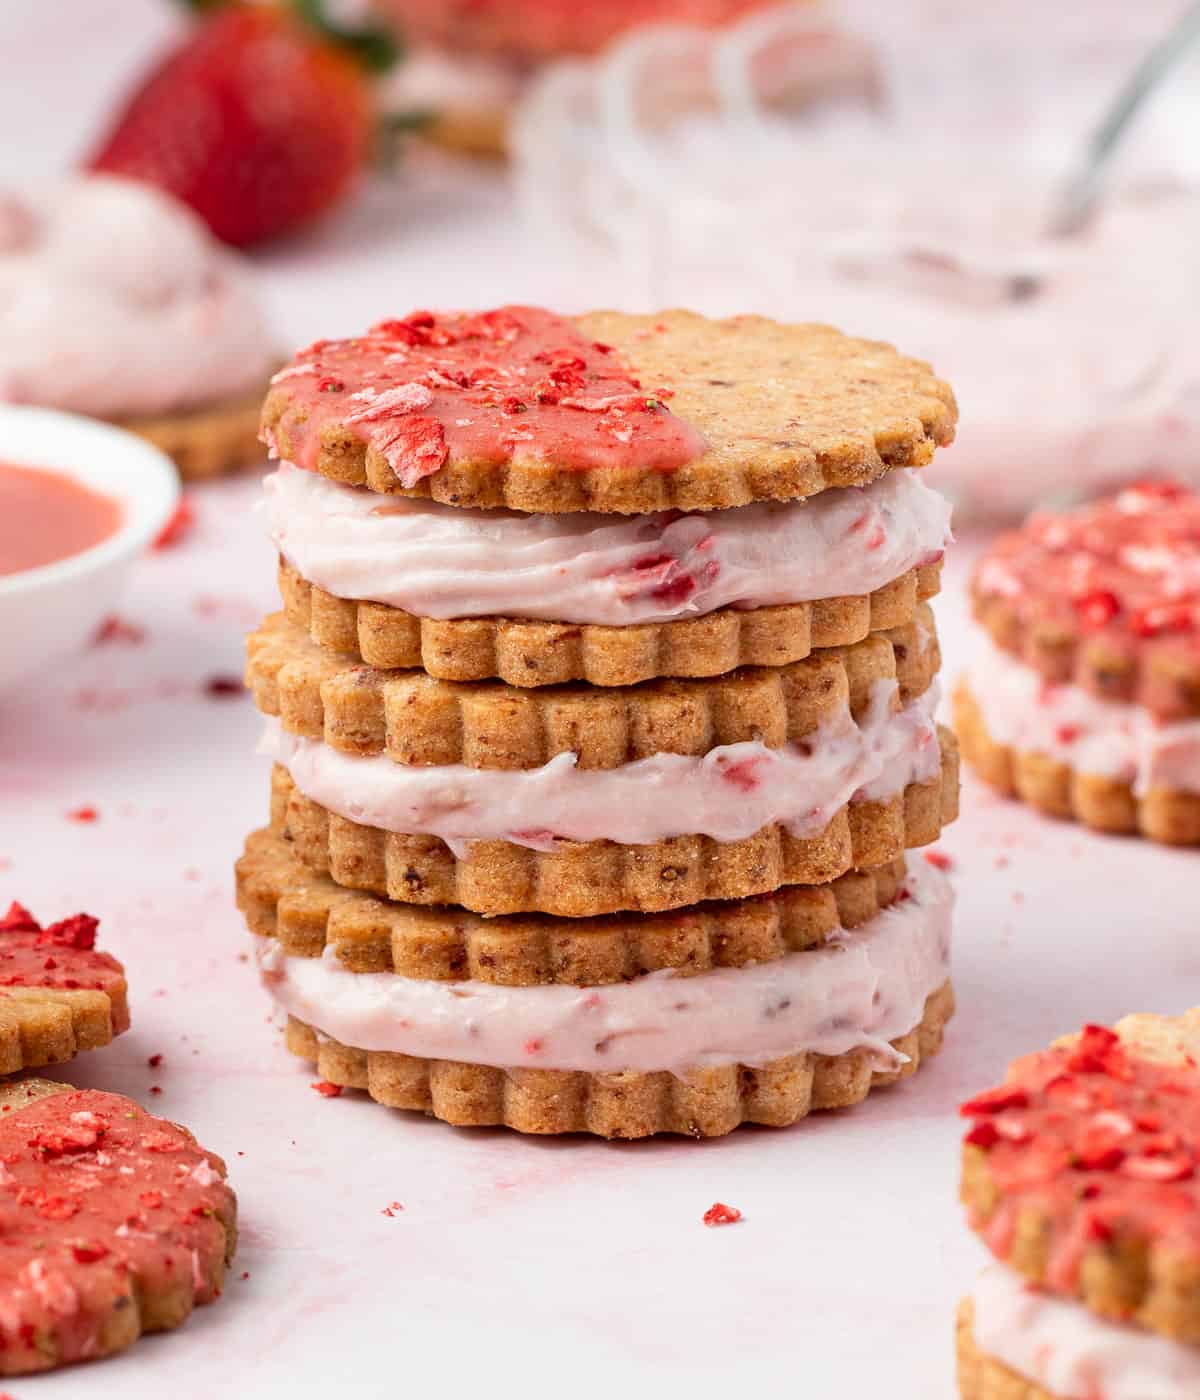 Three strawberry cookies stacked on top of each other over a pink surface.